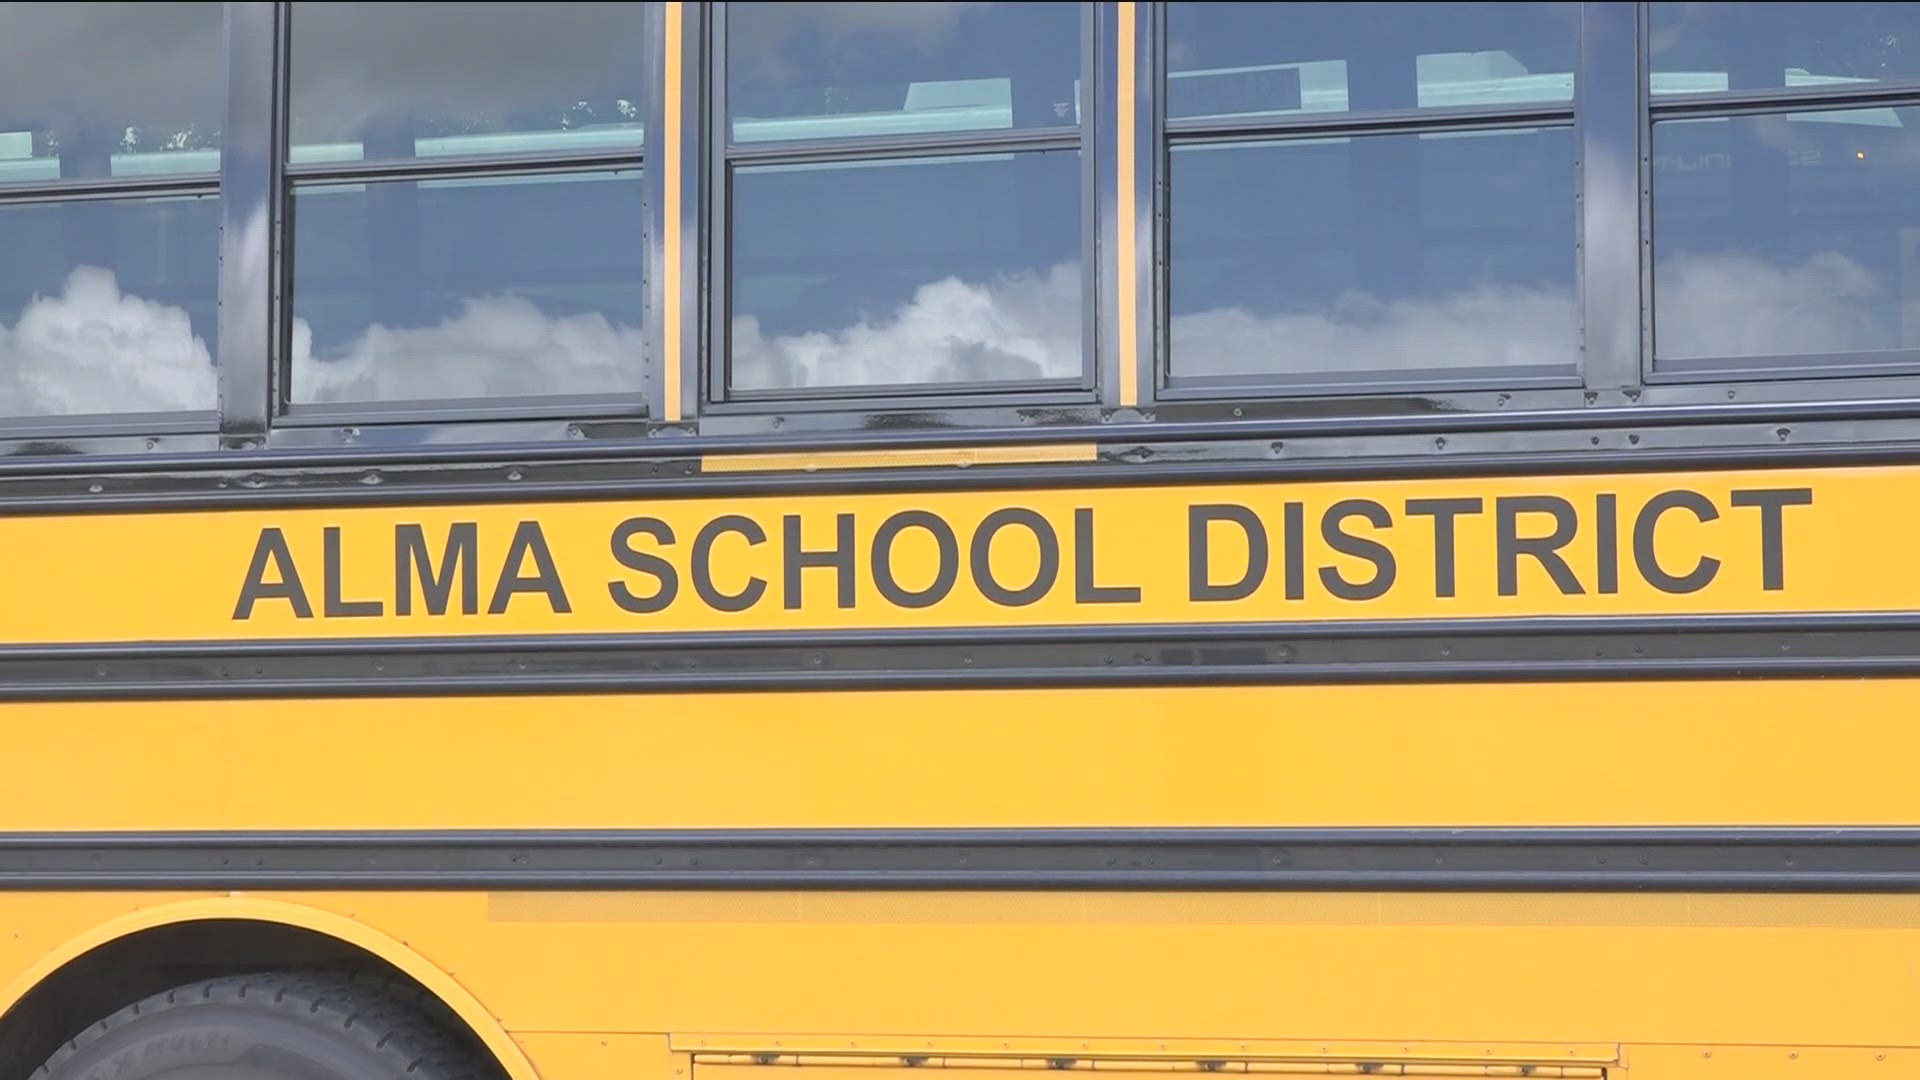 Last year, the district received a $3 million grant for eight new electric buses.